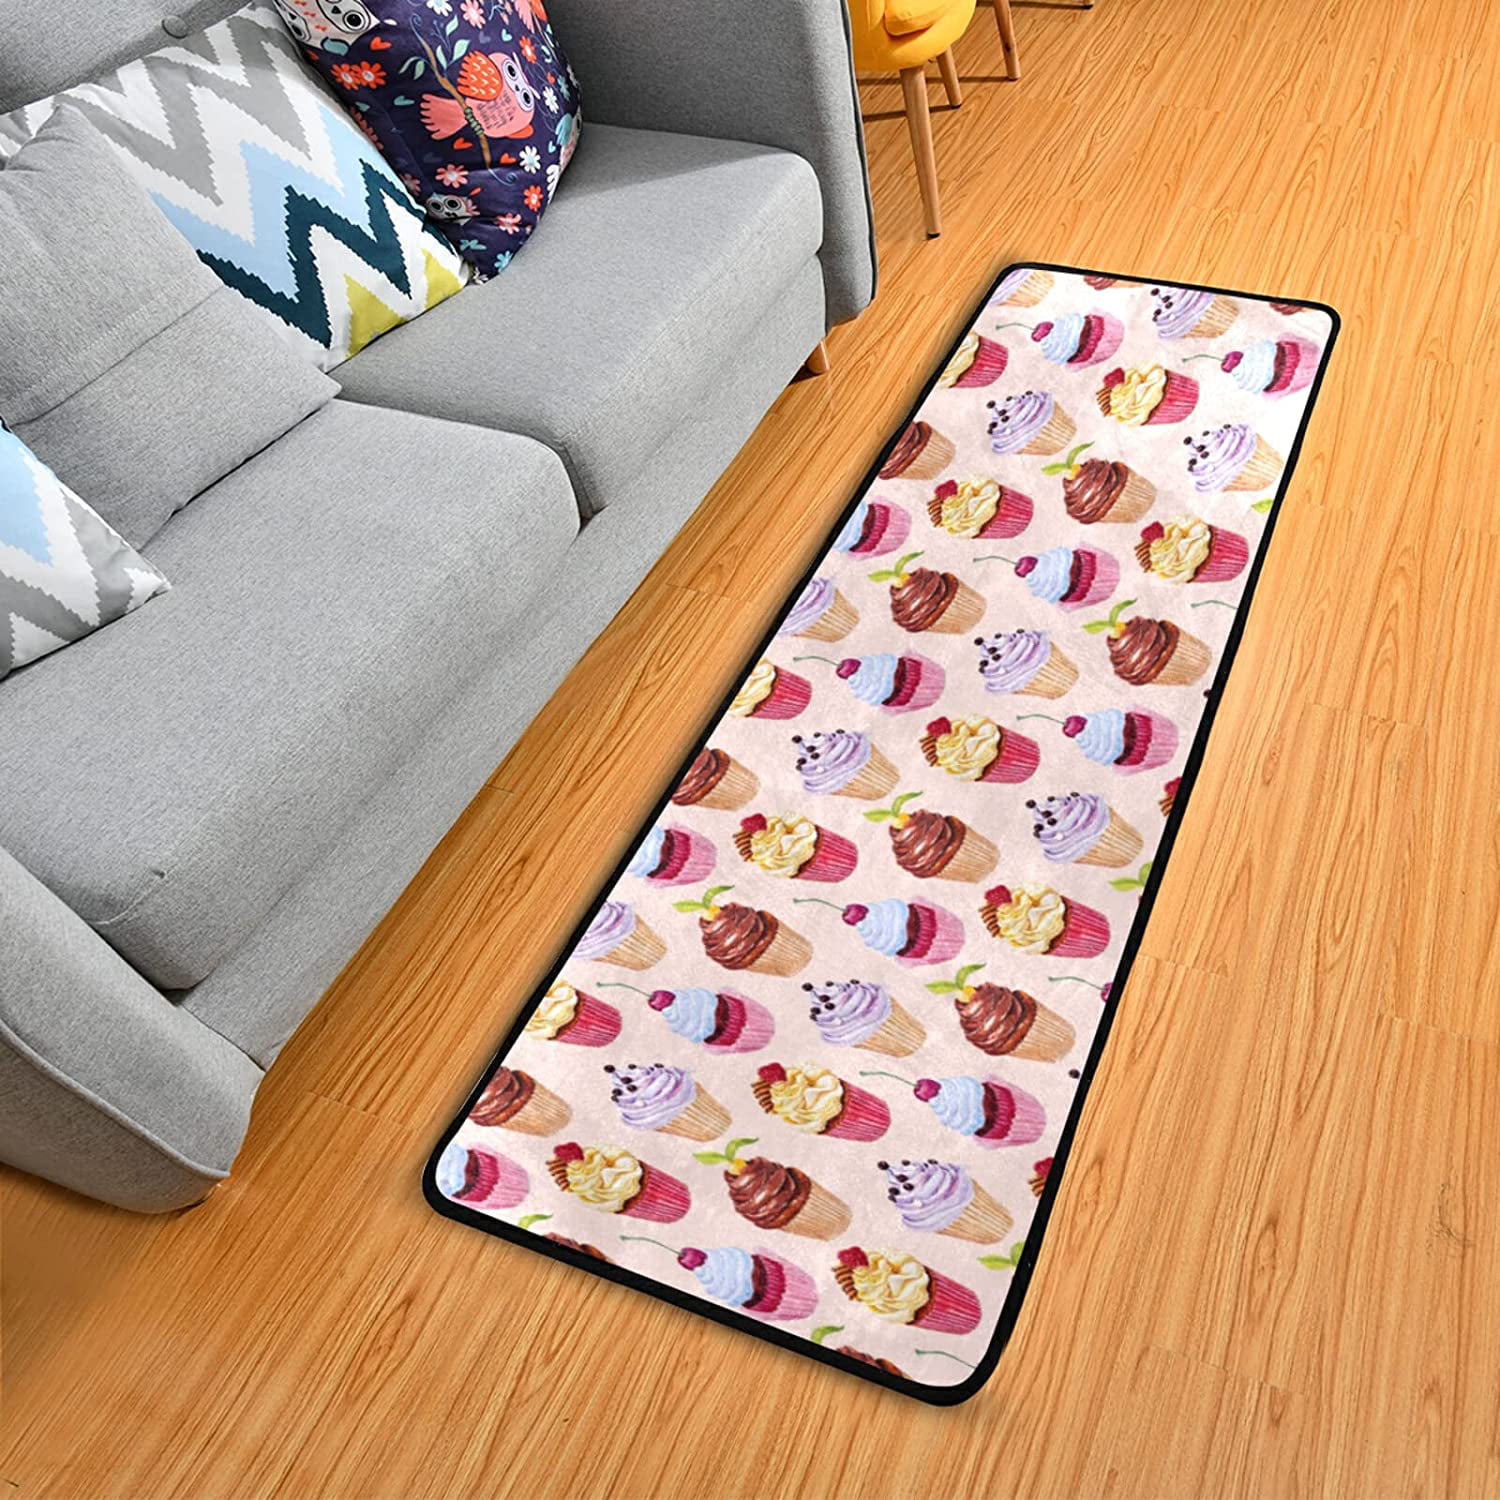 Low Pile Rug Cute Floral in The Small Flower Seamless Texture Elegant Template Non-Slip Soft Area Carpet Doormats Runner Rugs Mat Indoor Outdoor Home Decor for Living Room Bedroom Kids Room